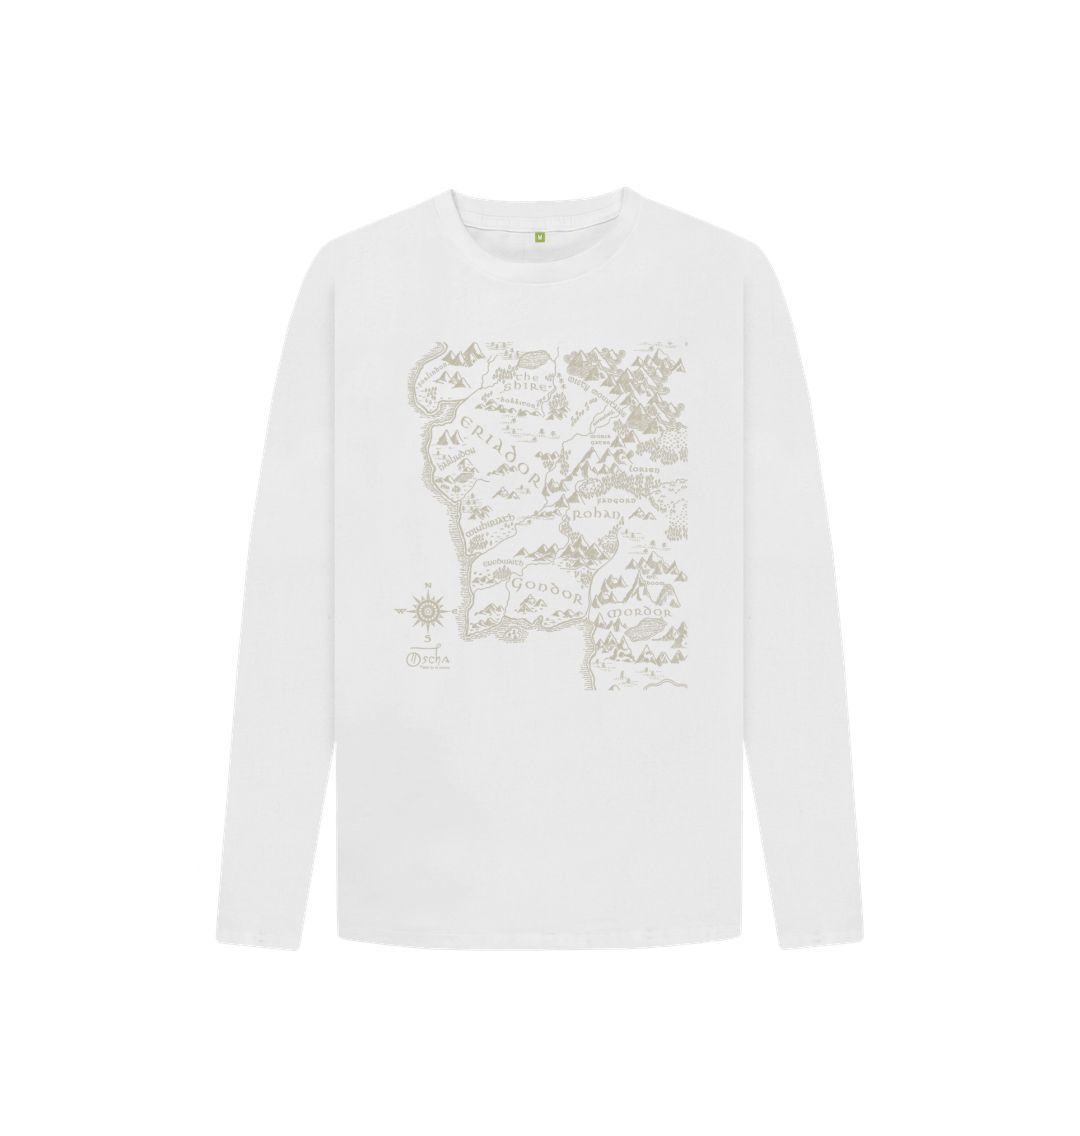 White Realm of MIDDLE-EARTH\u2122 Kids Long Sleeved T-shirt